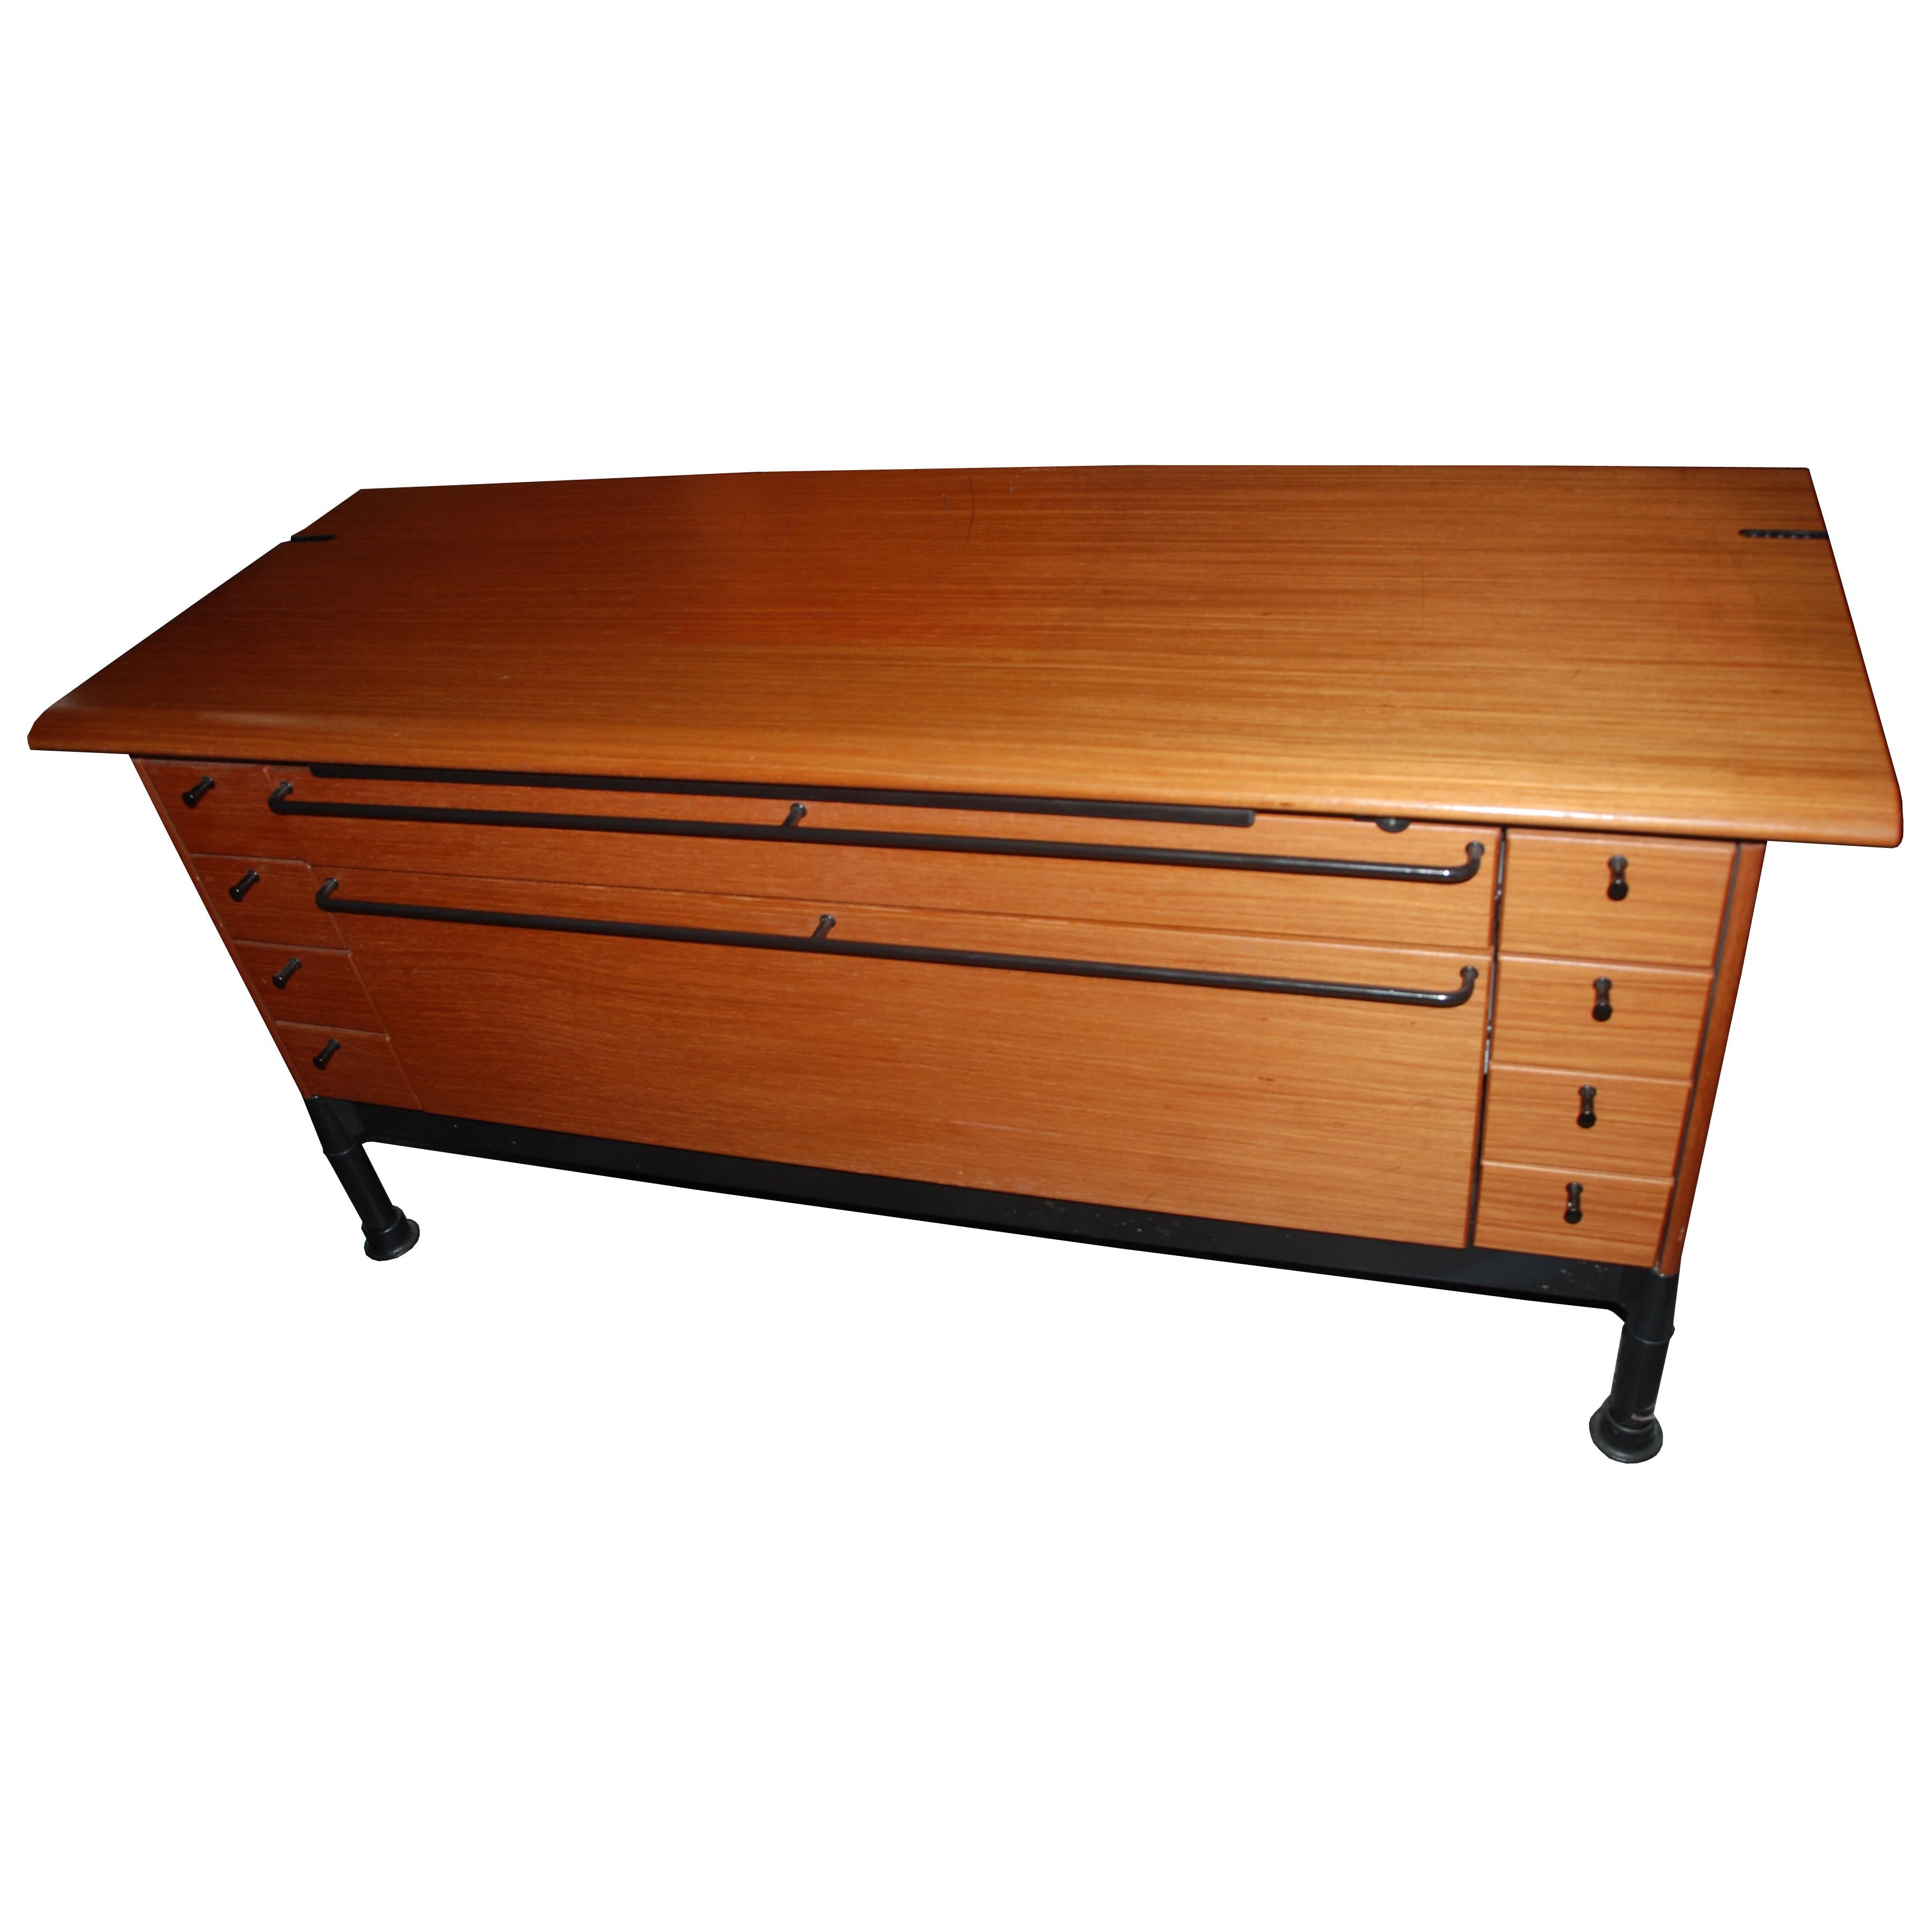 5ft Herman Miller credenza by Geoff Hollington 

Vintage 5 ft Geoff Hollington credenza for Herman Miller. Credenza features 8 small drawers on the sides, and 2 large flat file drawers in the middle.

10 Available 
Also available with bookcase see